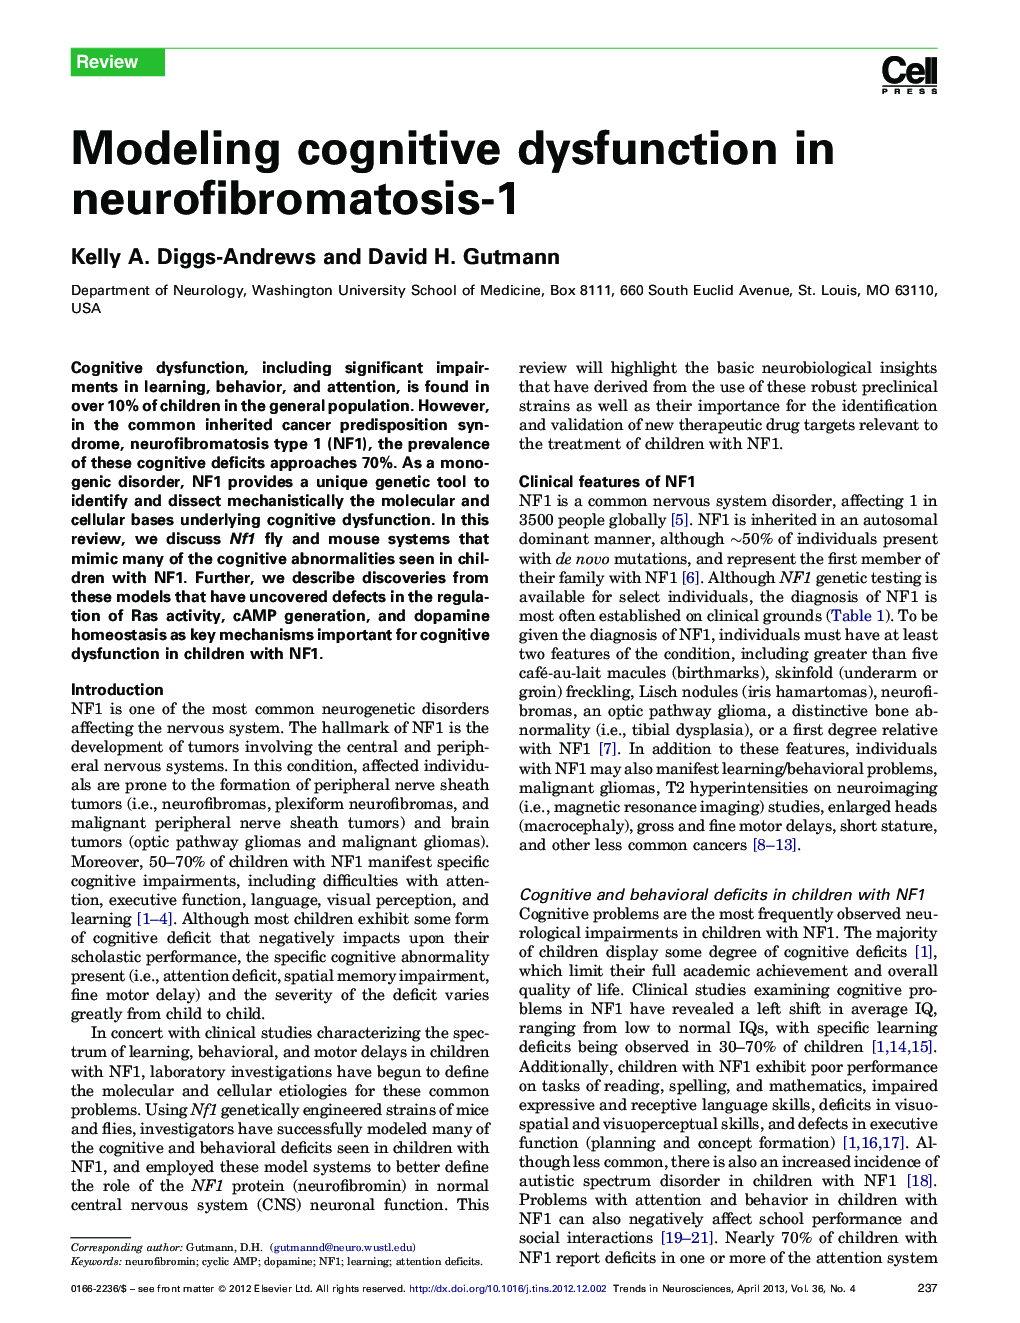 Modeling cognitive dysfunction in neurofibromatosis-1